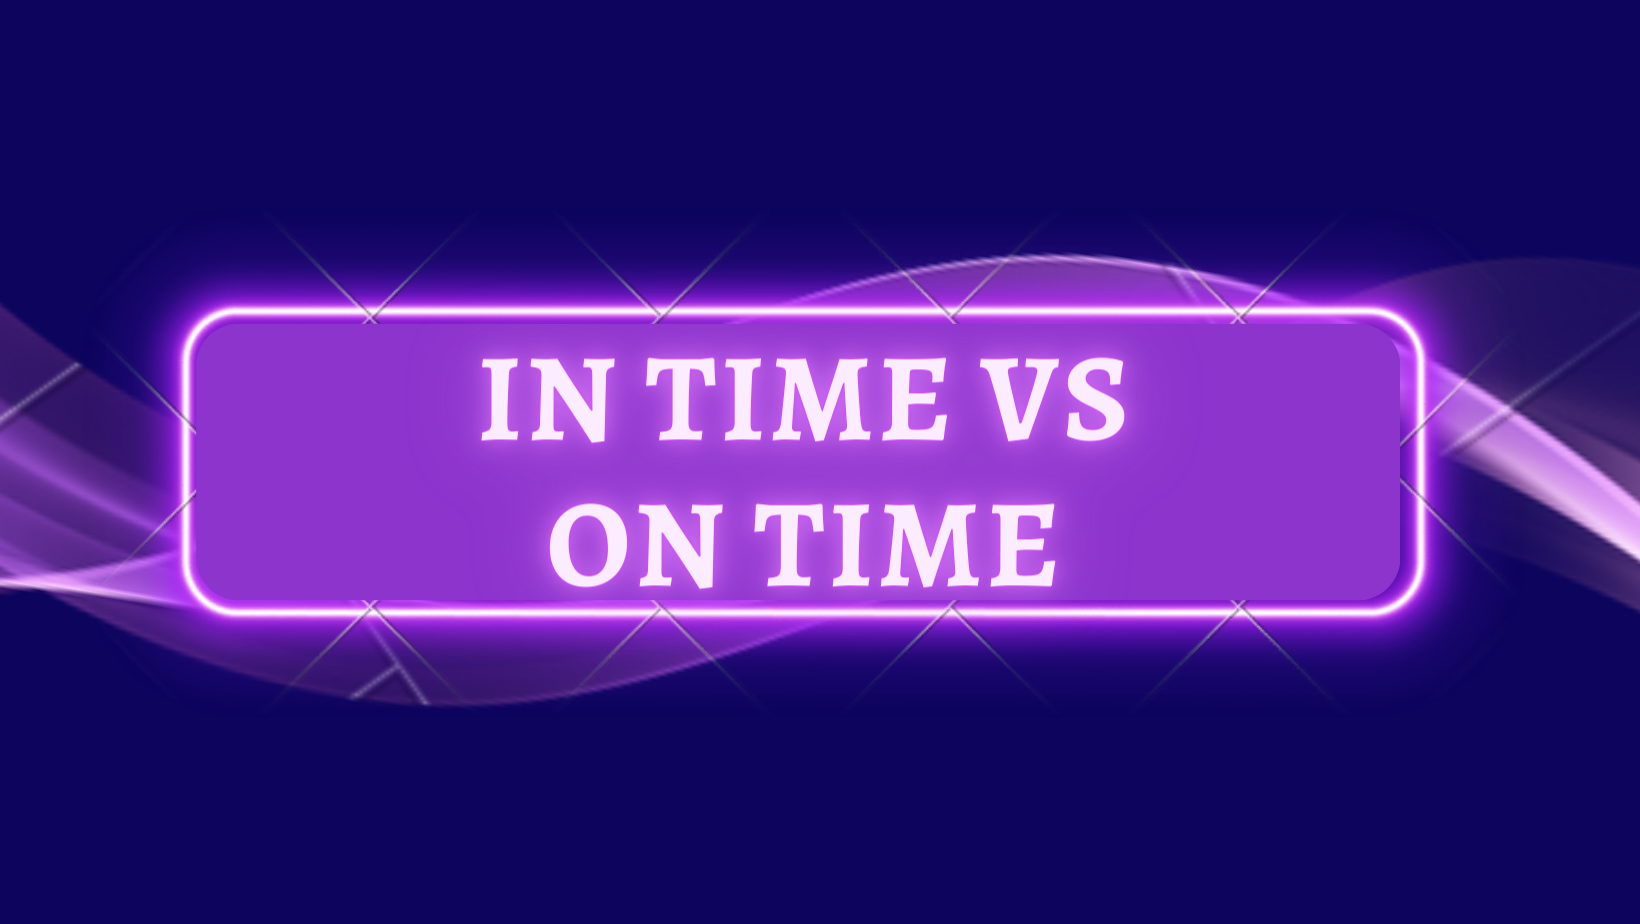 In Time vs On Time